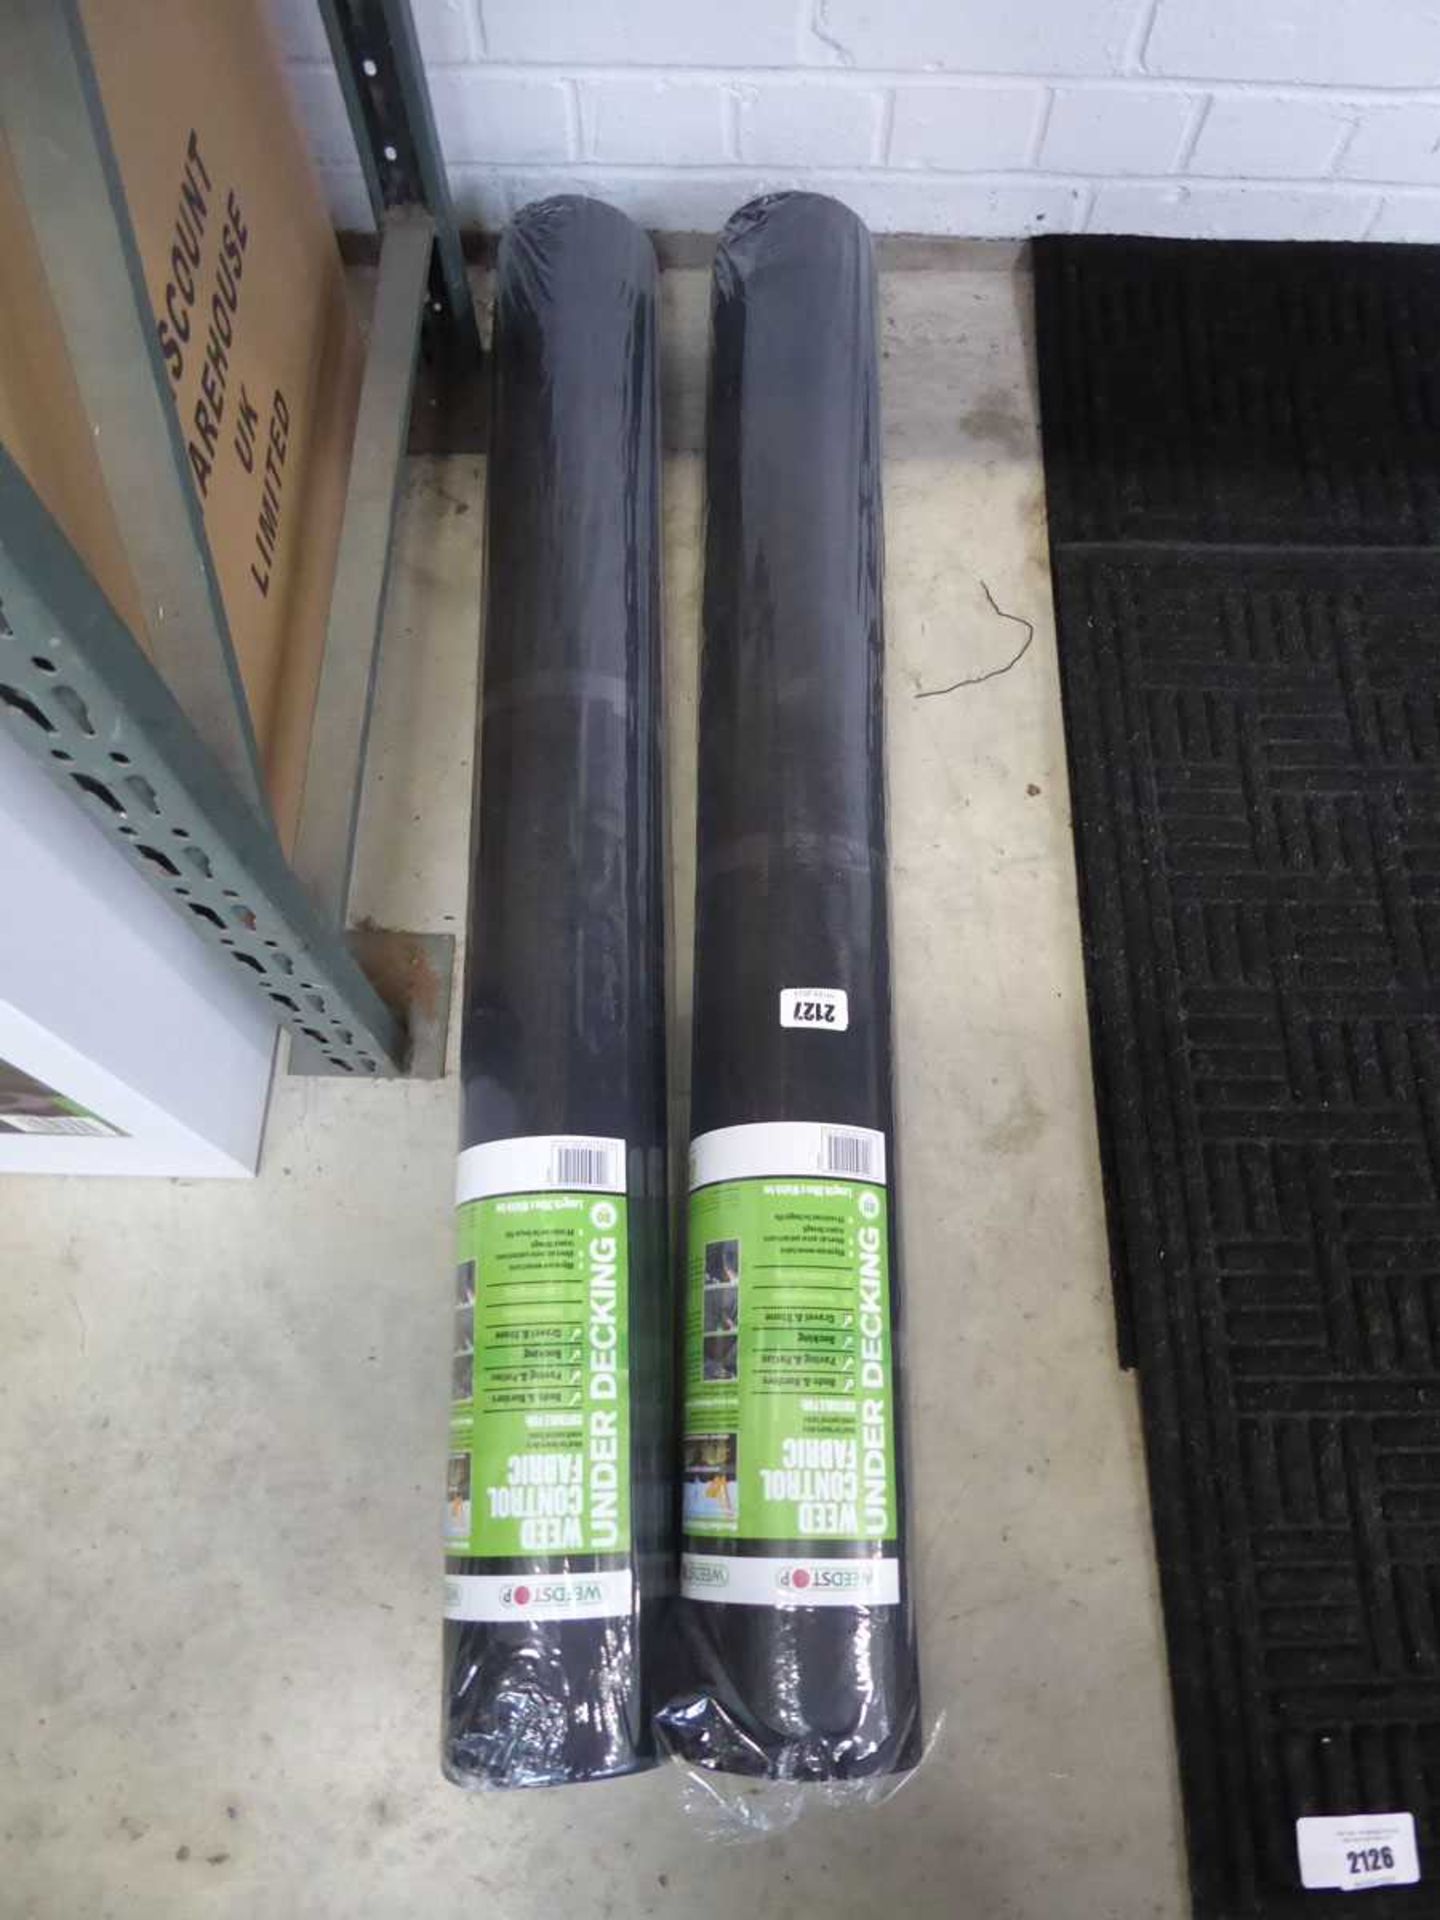 2 rolls of 30m x 1m weed control fabric